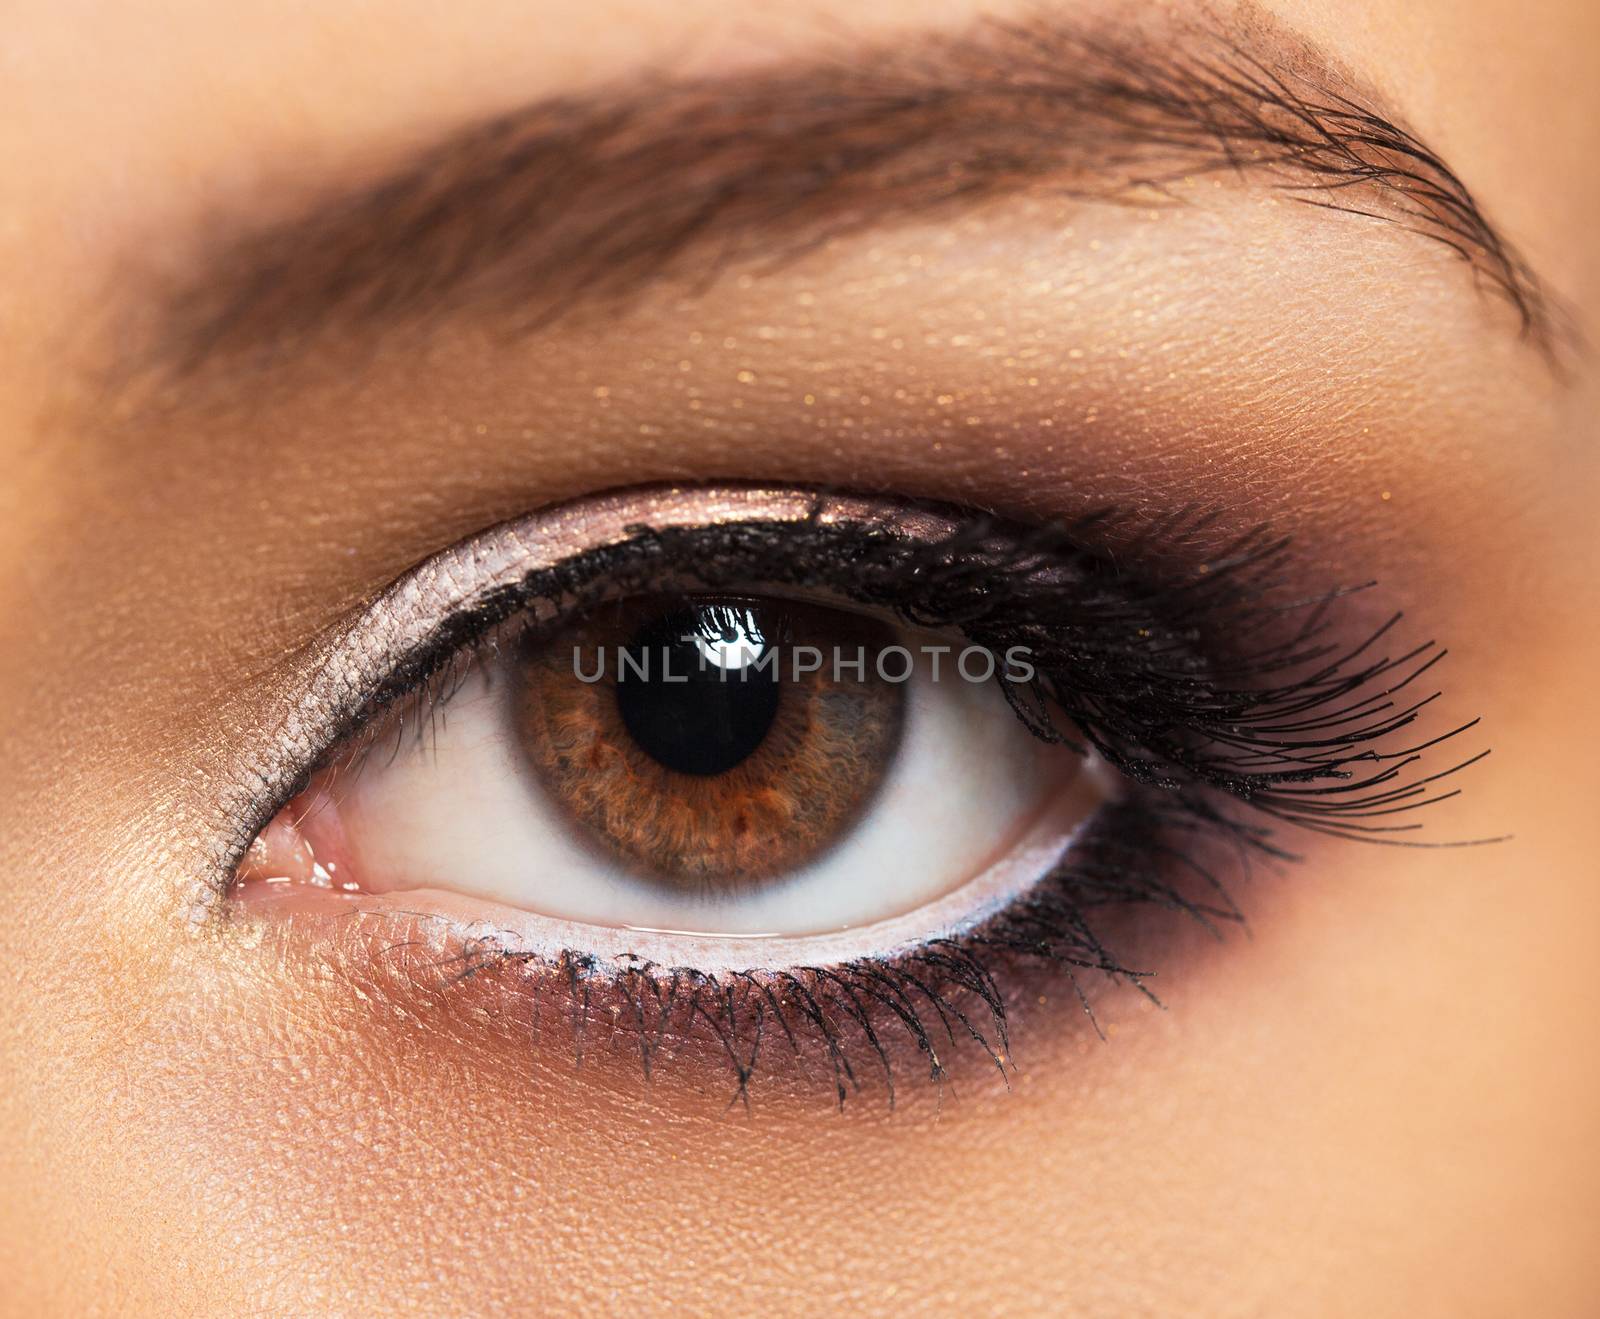 Closeup of beautiful eye with glamorous makeup by vlad_star